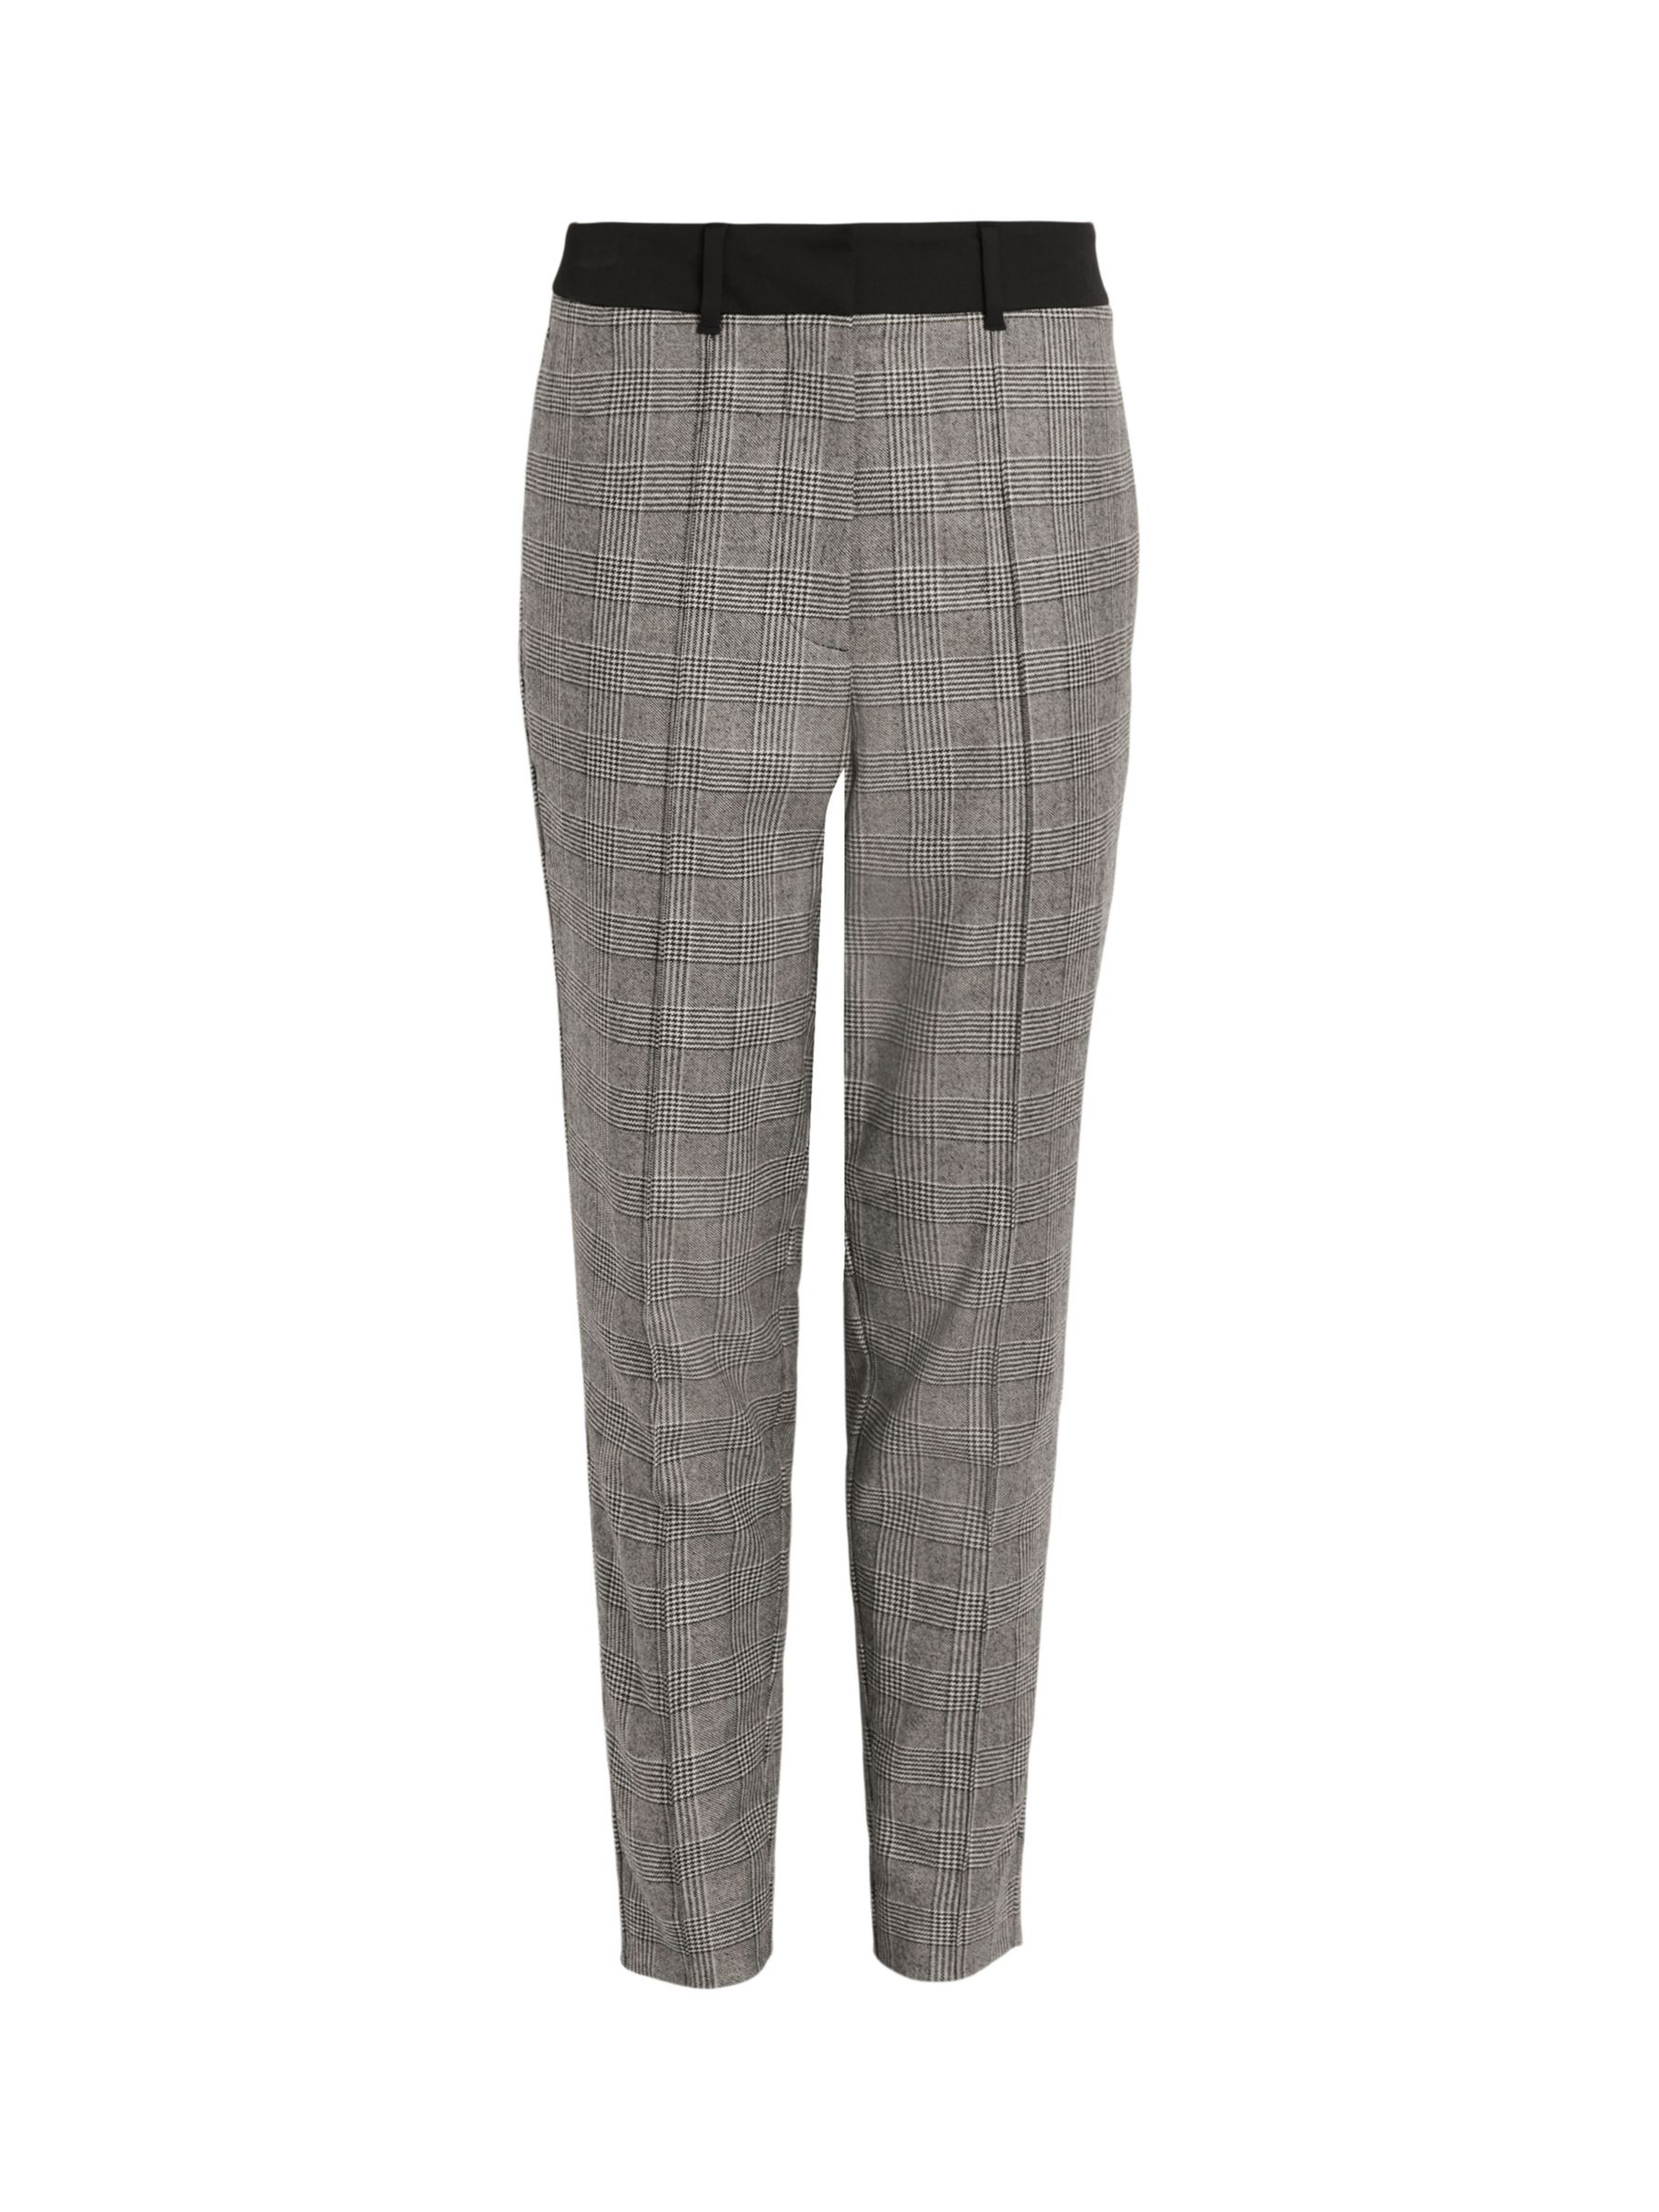 AllSaints Bea Skinny Fit Wool Blend Check Trousers, Grey at John Lewis ...